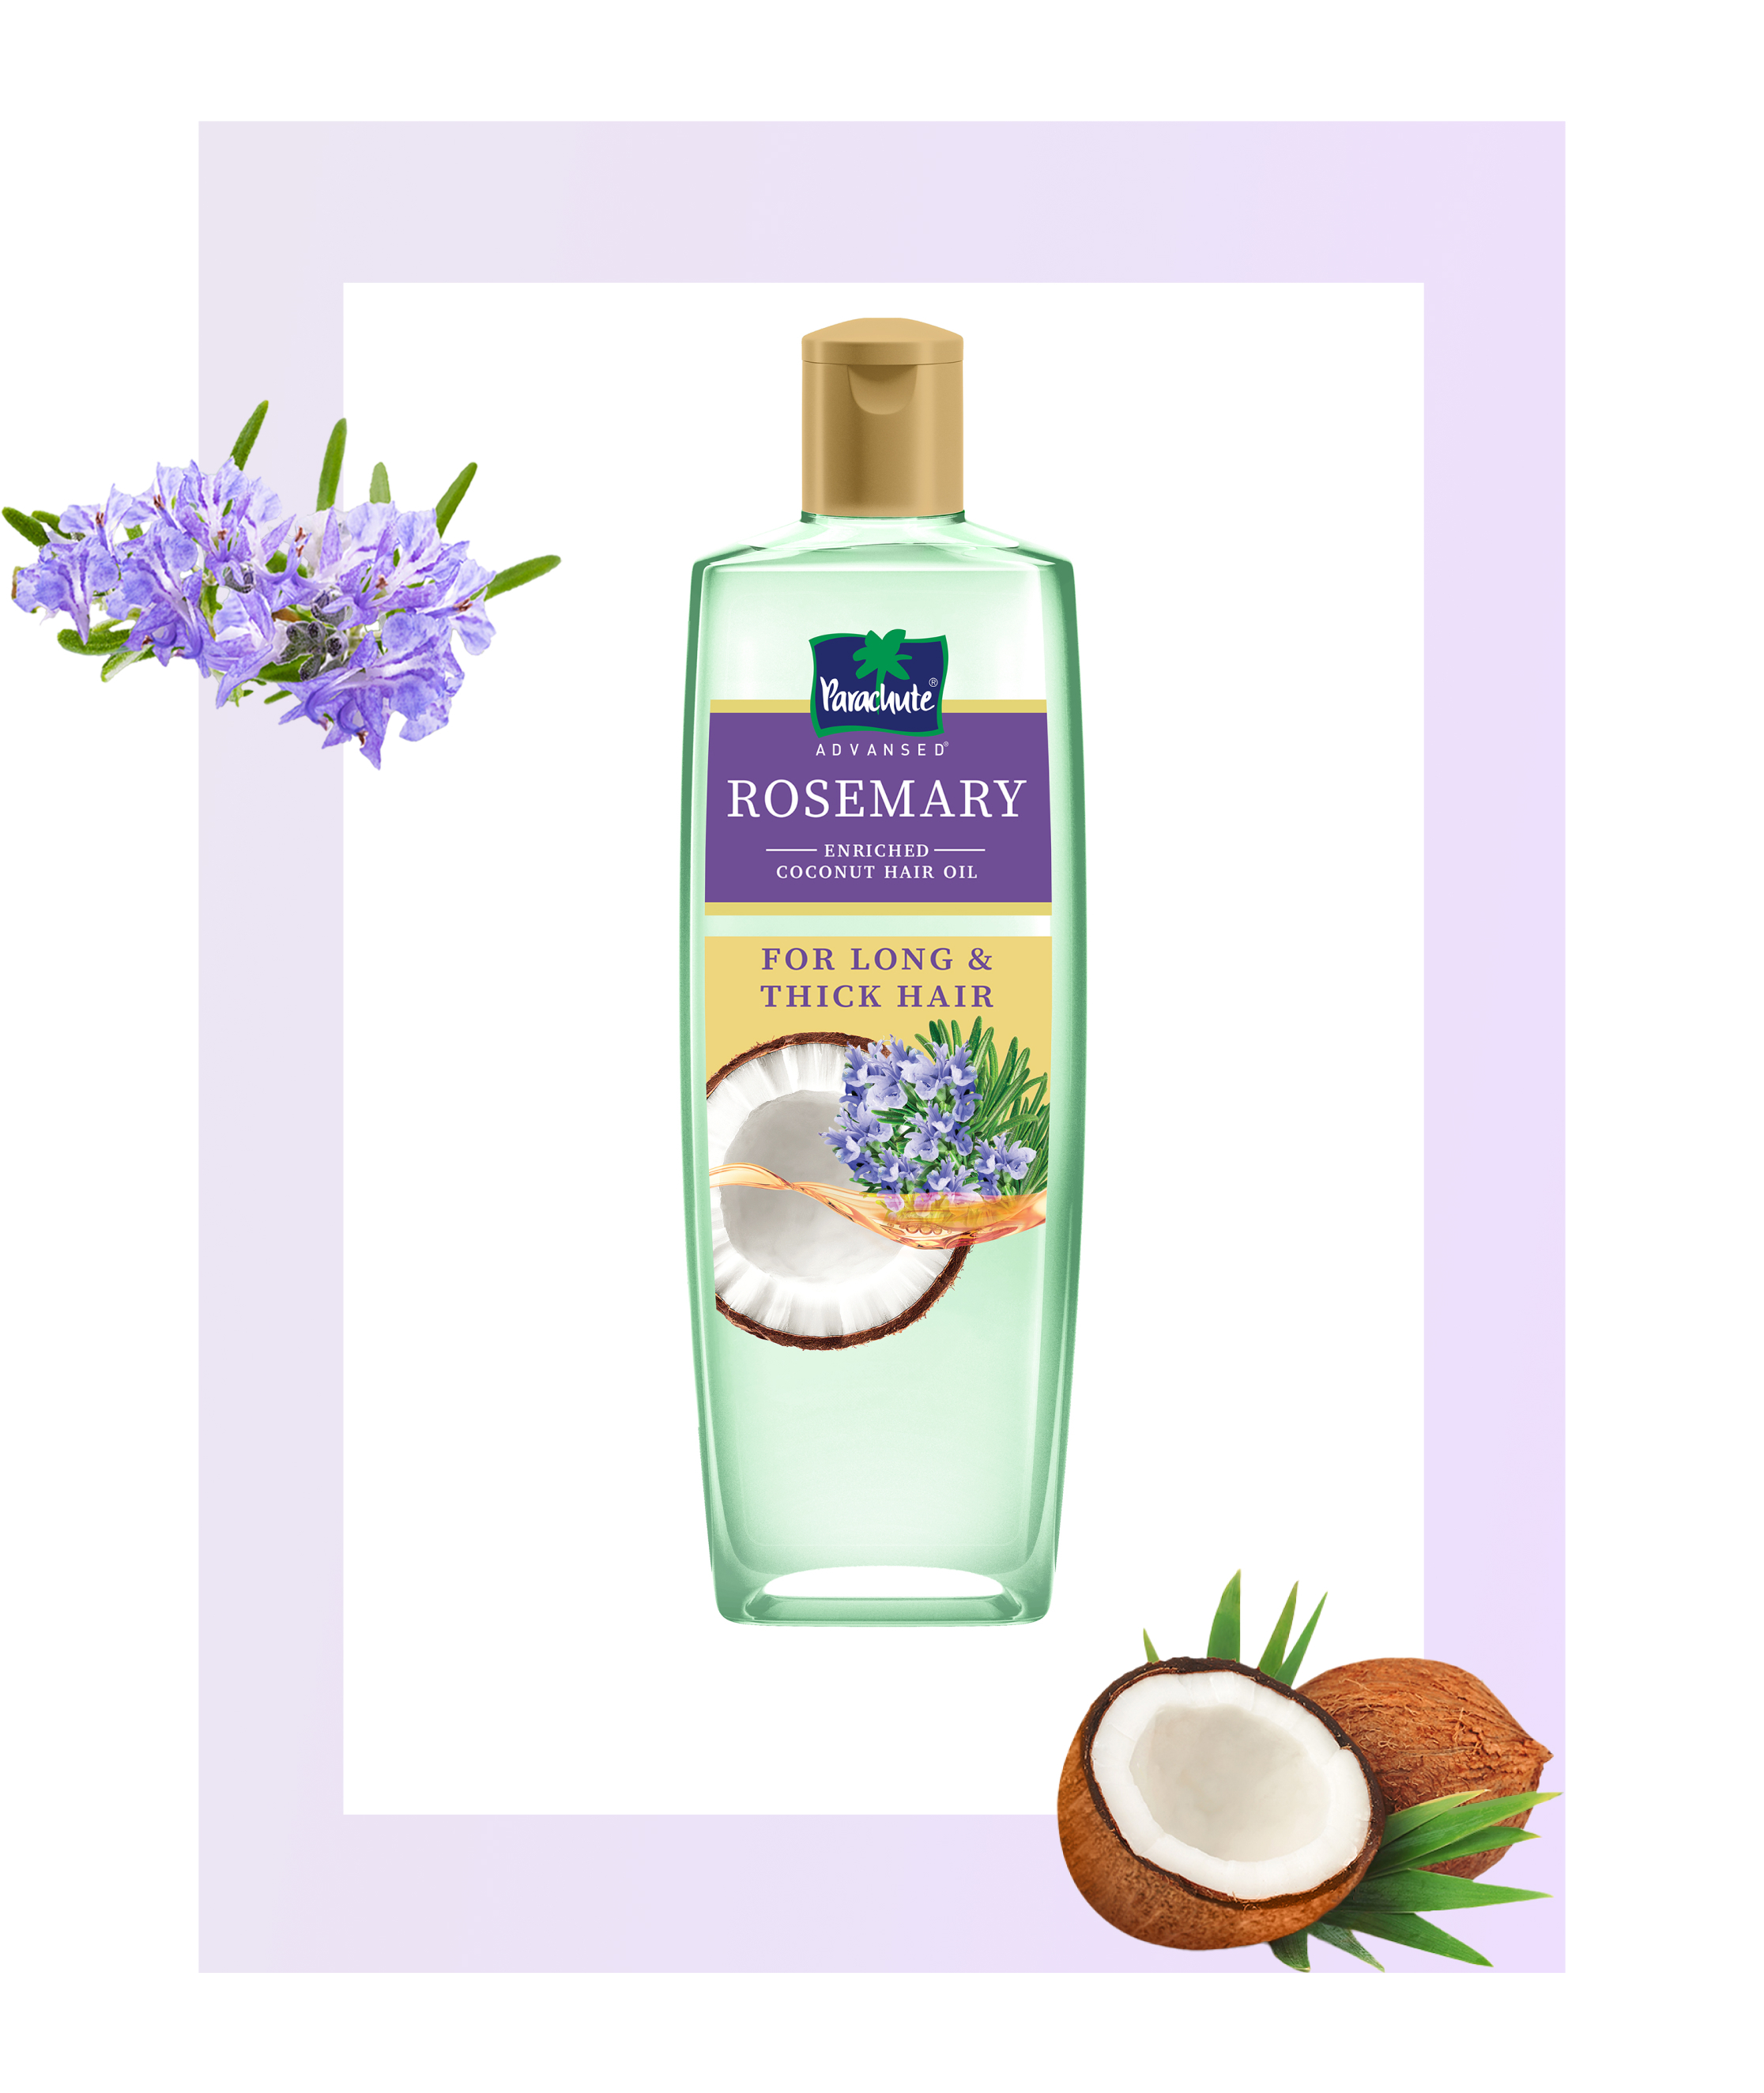 Parachute Advansed Rosemary hair oil with ingredients